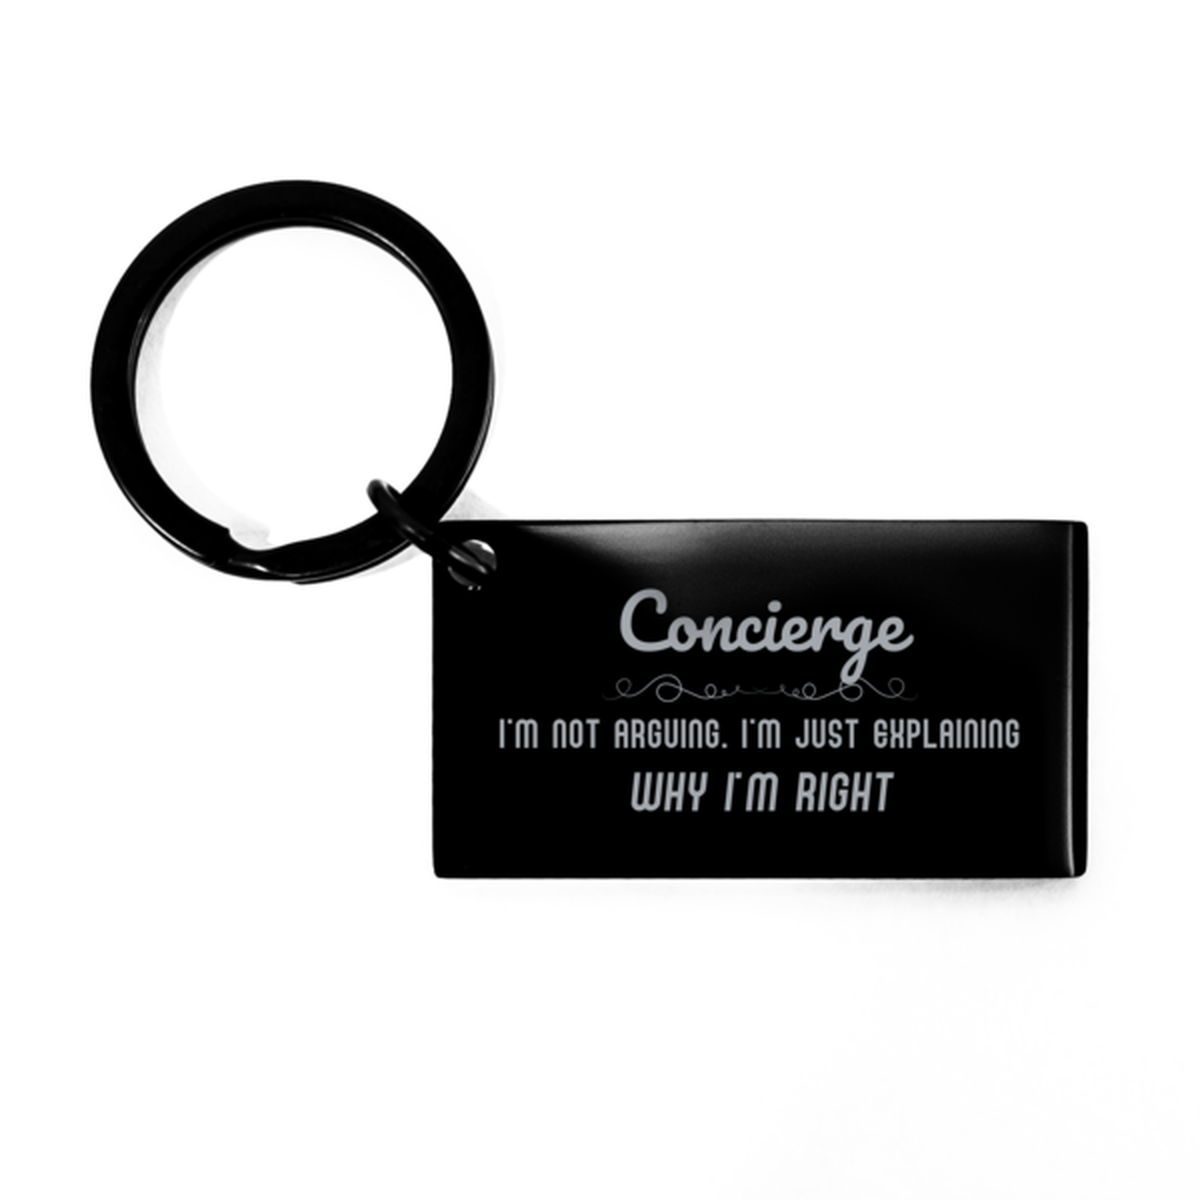 Concierge I'm not Arguing. I'm Just Explaining Why I'm RIGHT Keychain, Funny Saying Quote Concierge Gifts For Concierge Graduation Birthday Christmas Gifts for Men Women Coworker